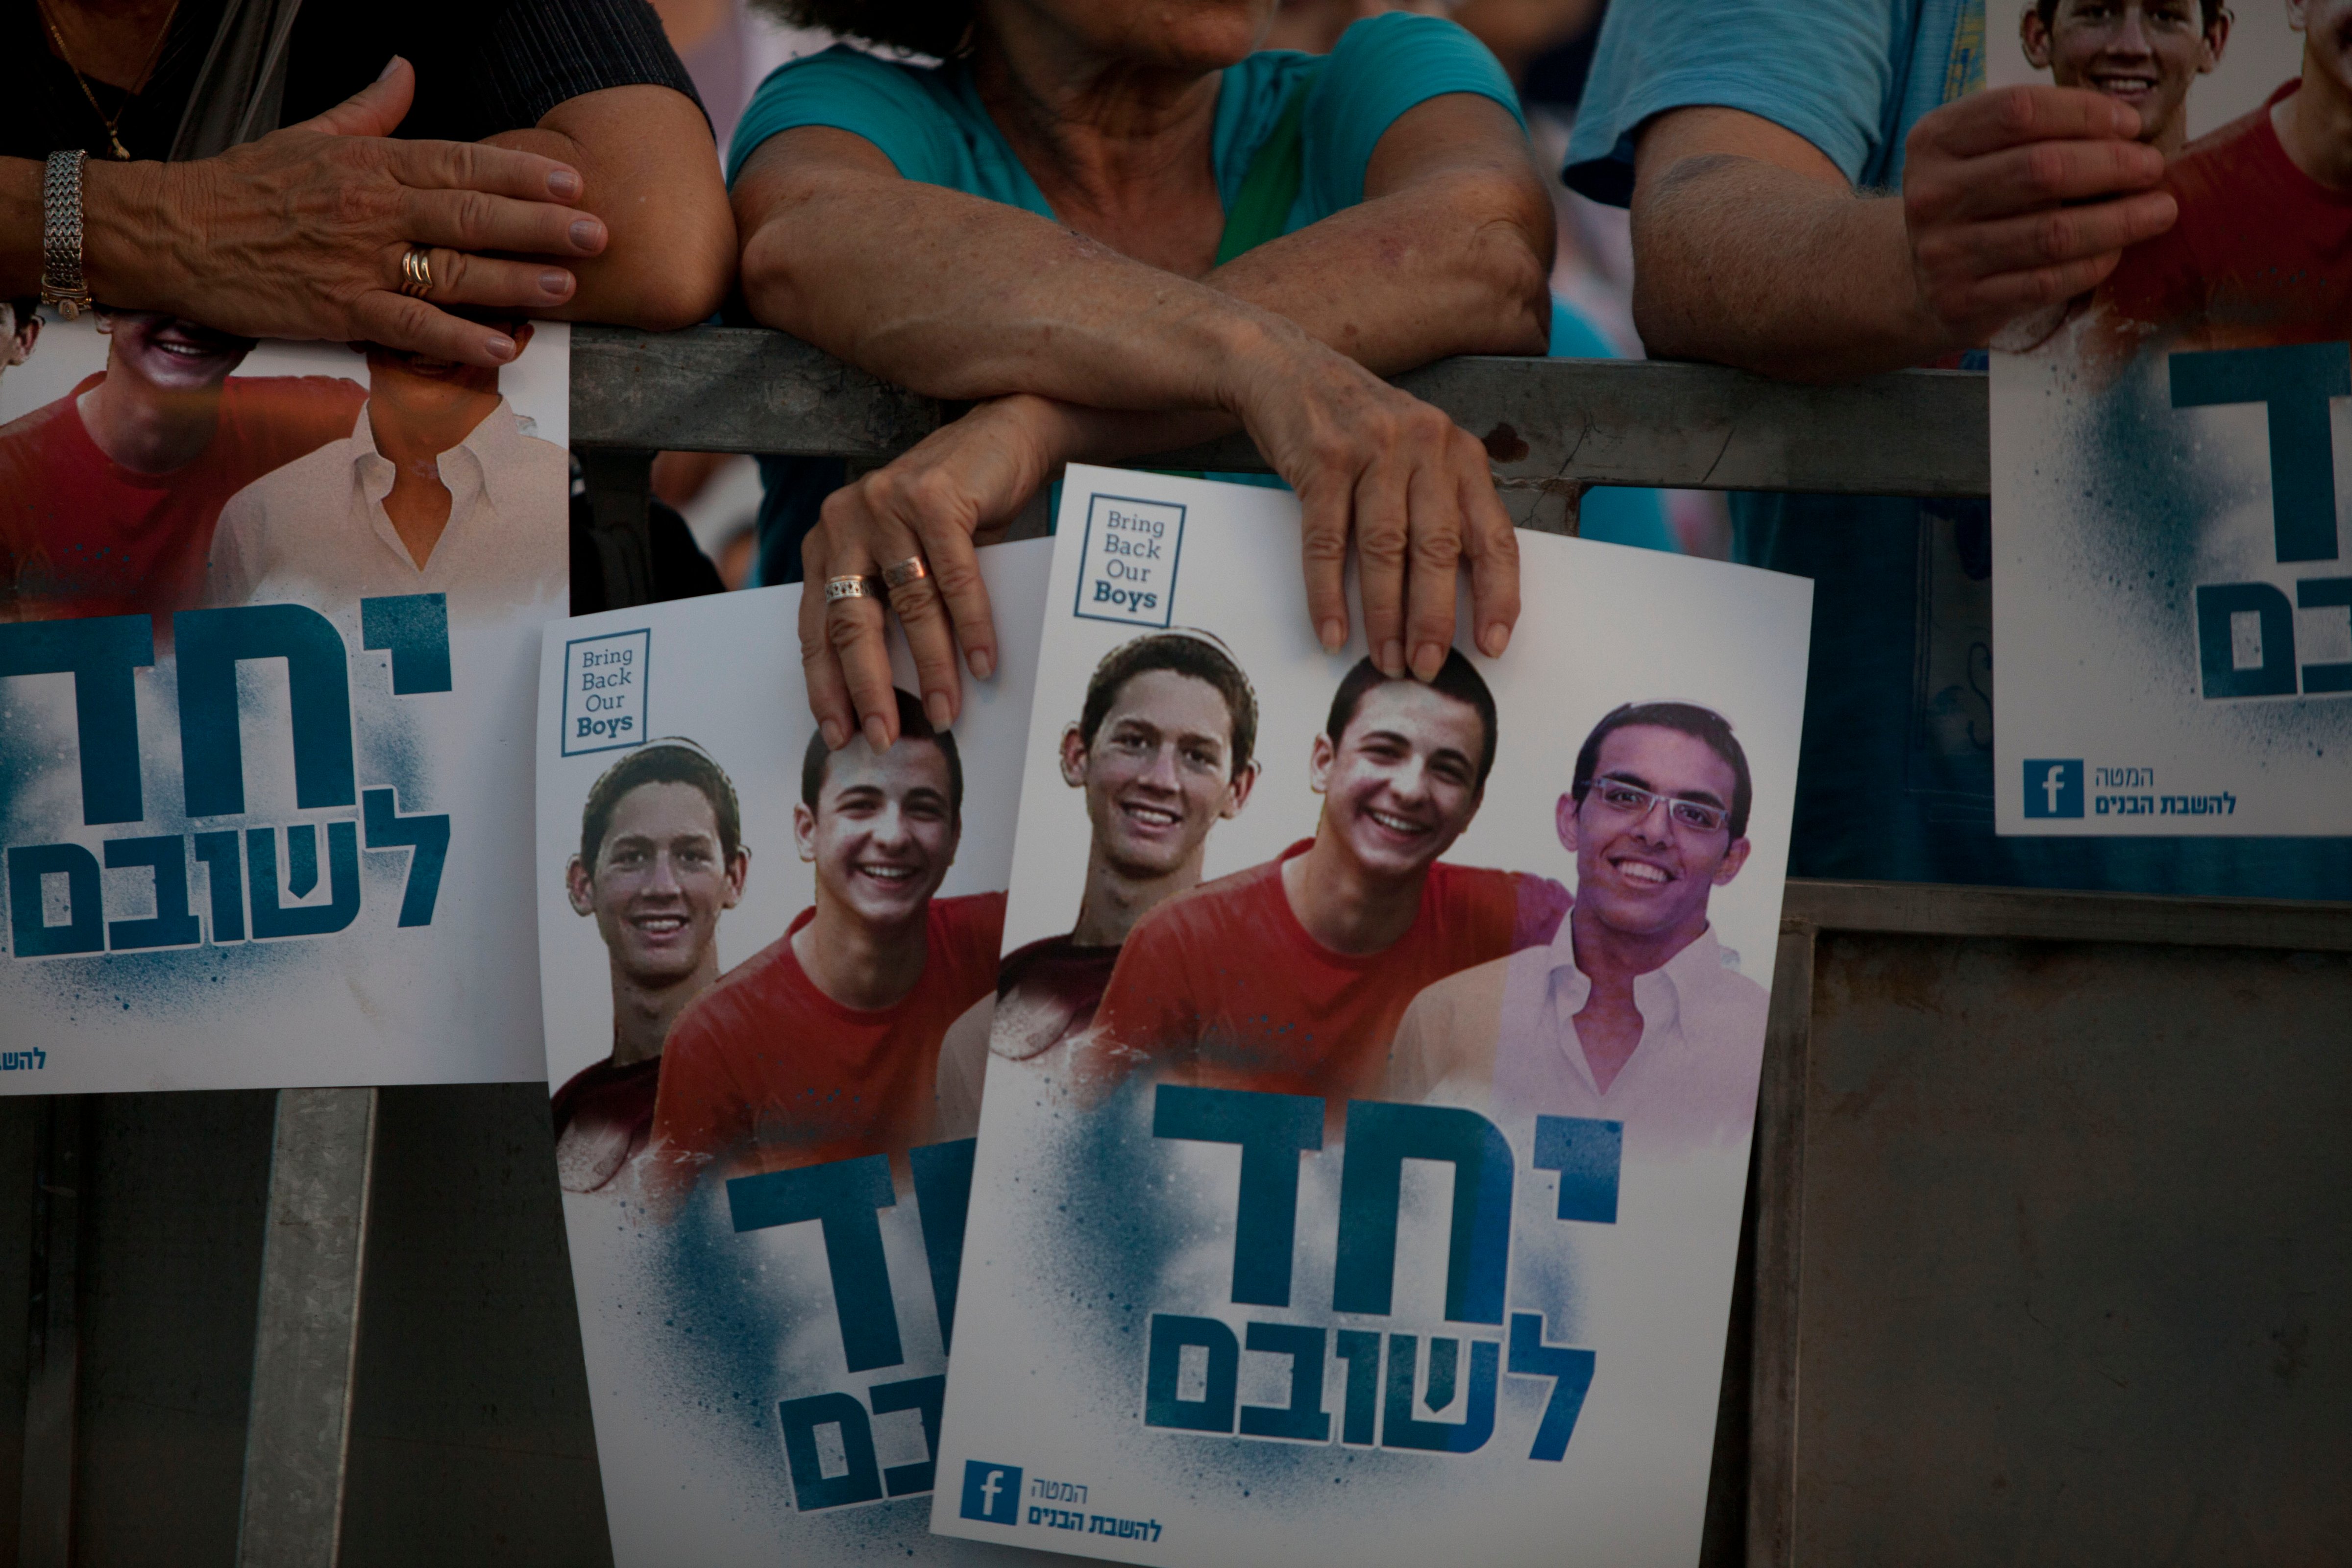 Israelis hold a poster showing the three missing Israeli teenagers, as they attend a rally under the slogan 'Bring Our Boys Home' on June 29, 2014 in Tel Aviv, Israel. (Lior Mizrahi—Getty Images)